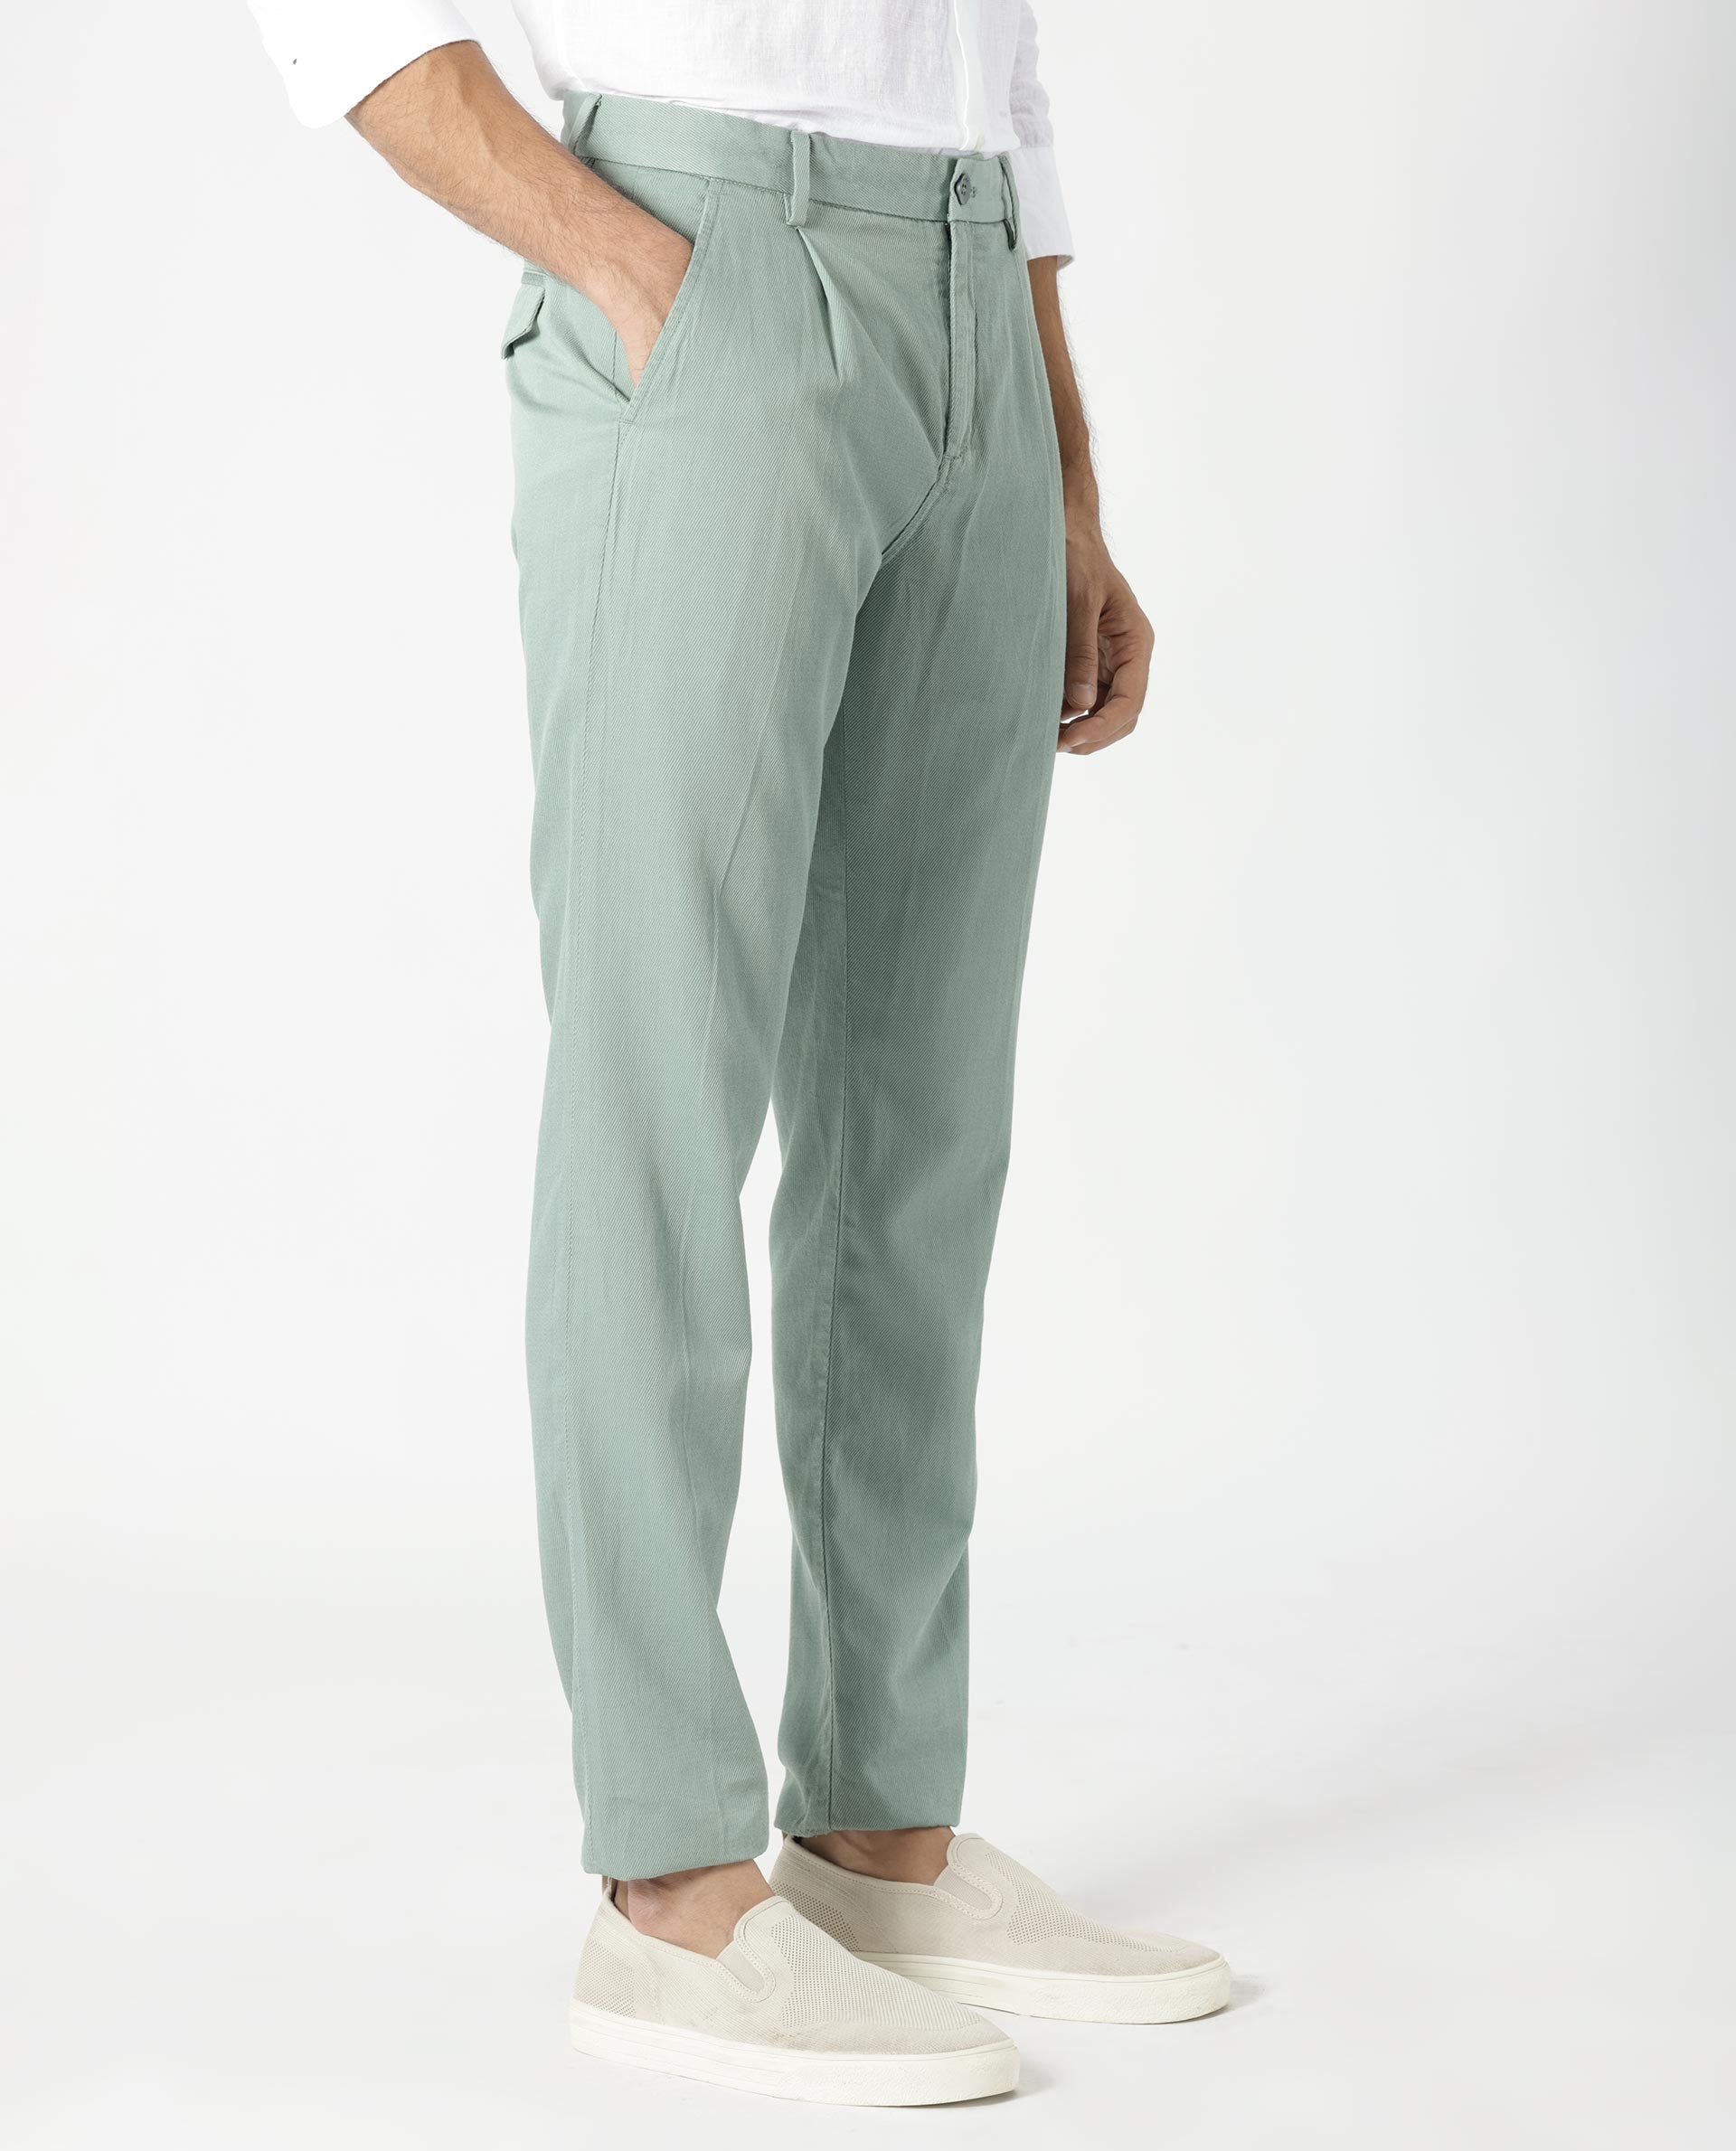 Women Light Green Trousers Price in India - Buy Women Light Green Trousers  online at Shopsy.in